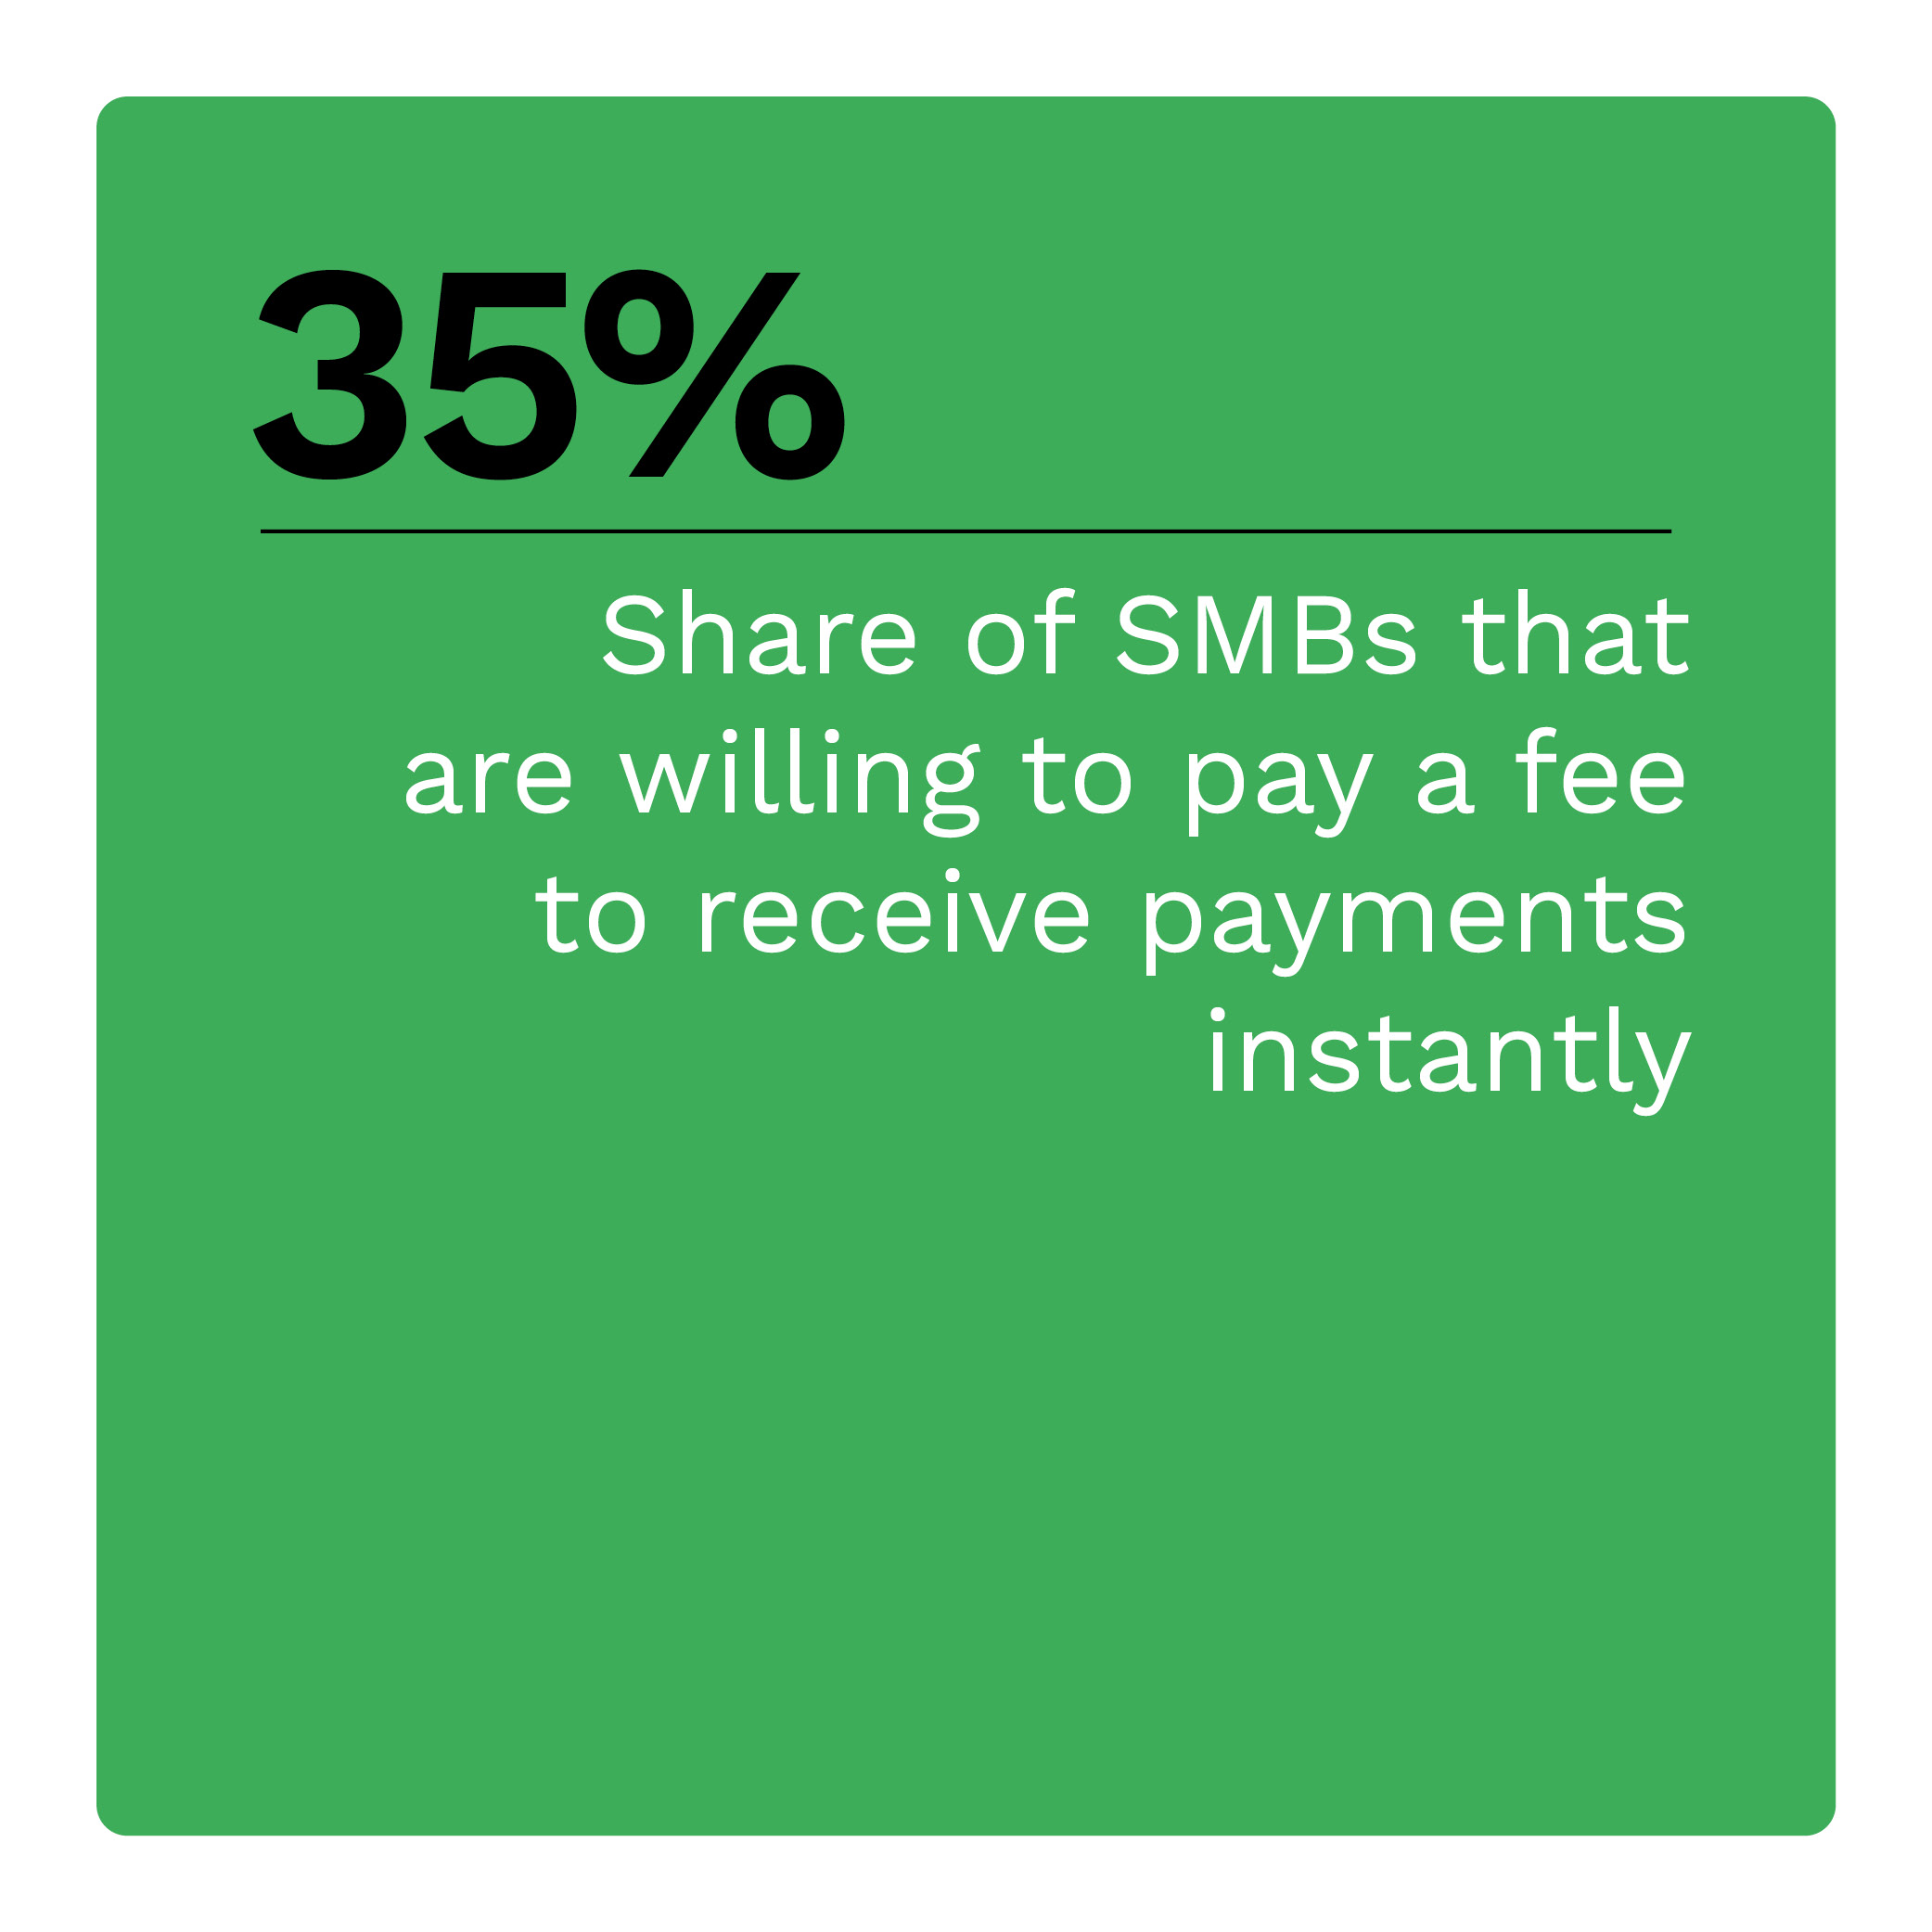 35%: Share of SMBs that are willing to pay a fee to receive payments instantly